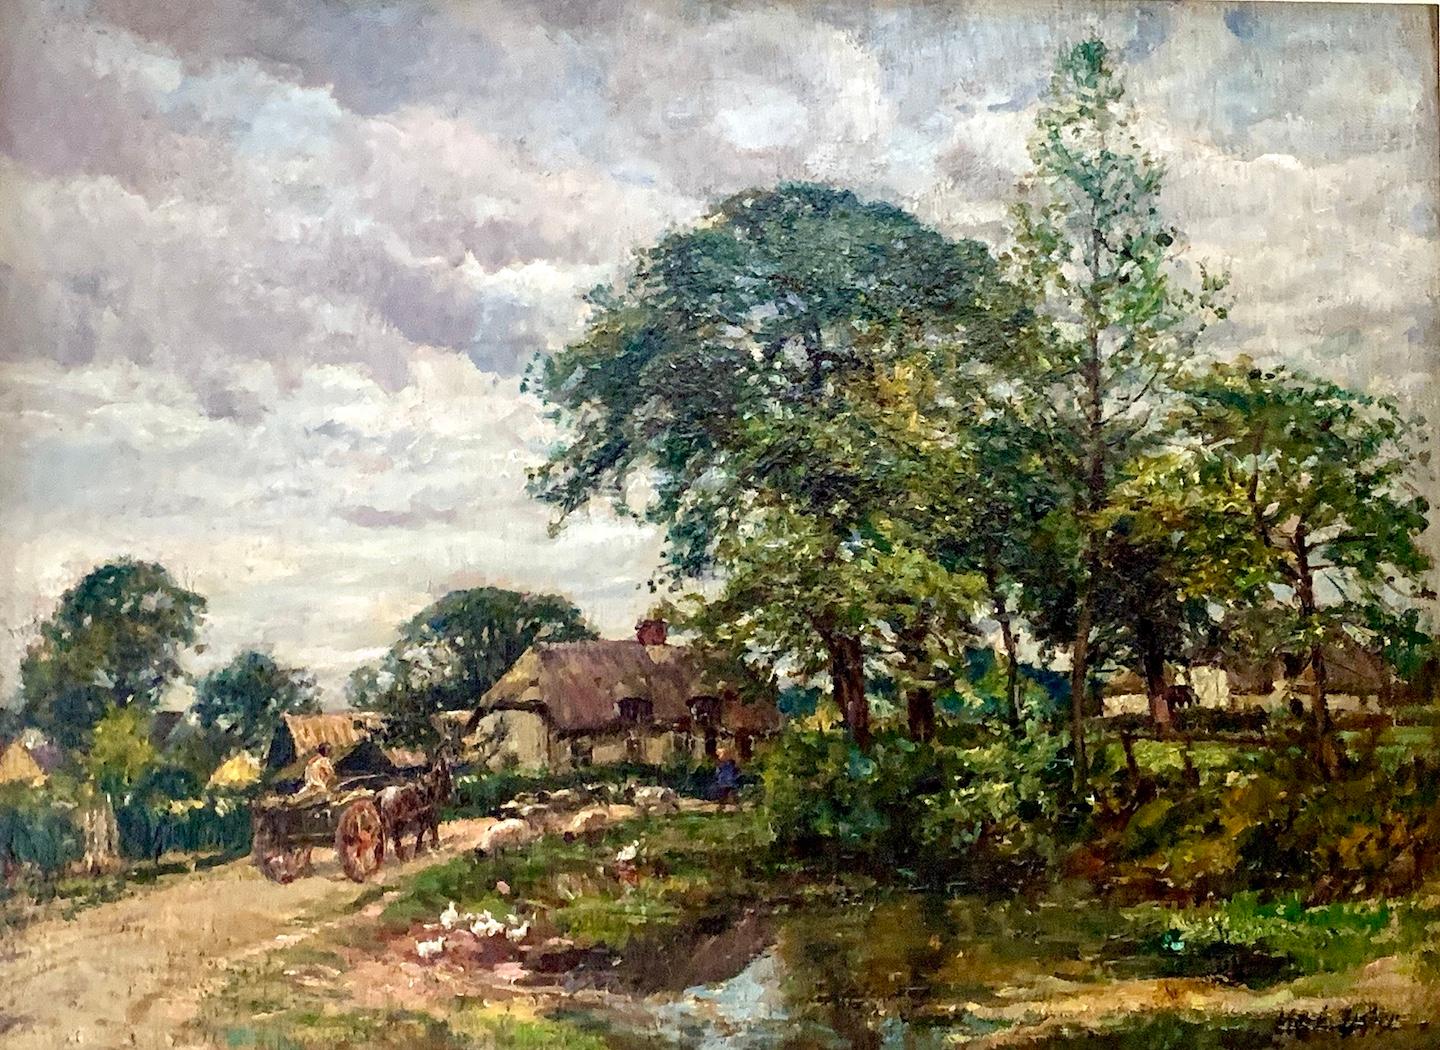 !9th century Impressionist landscape with a horse and cart in a Village - Painting by William Mark Fisher